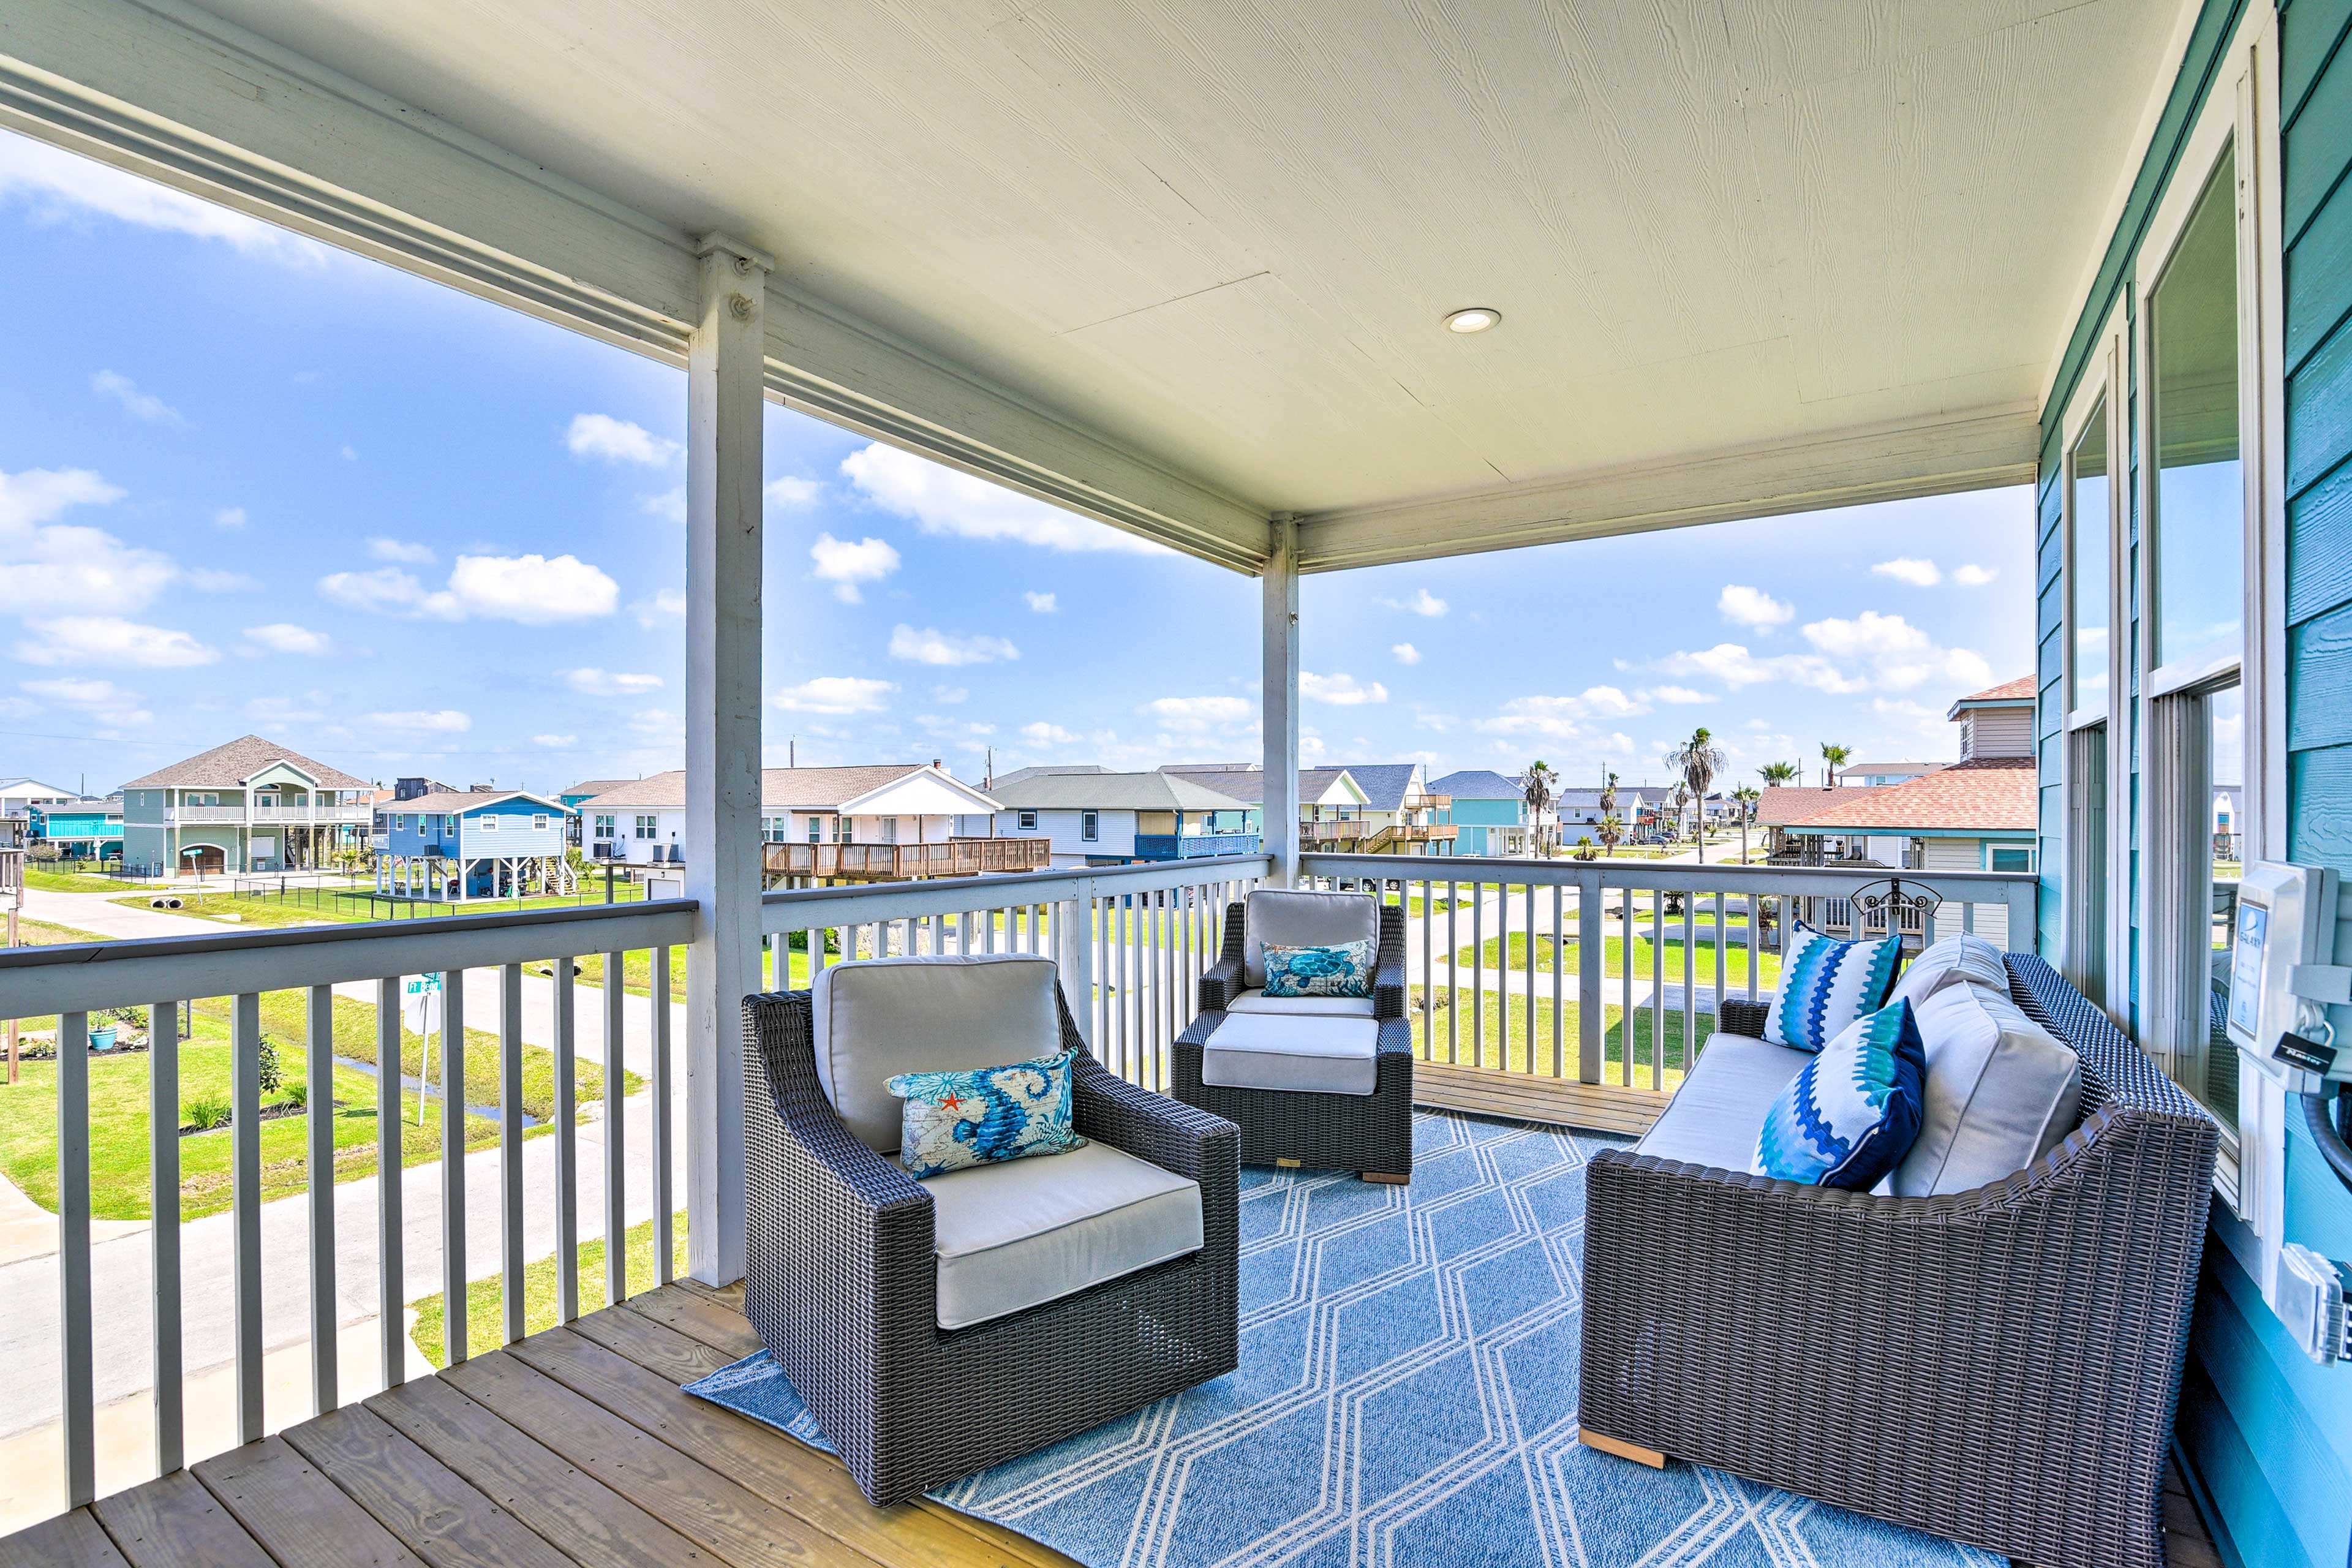 Galveston Vacation Rental | 3BR | 2BA | 1,570 Sq Ft | Stairs Required to Enter